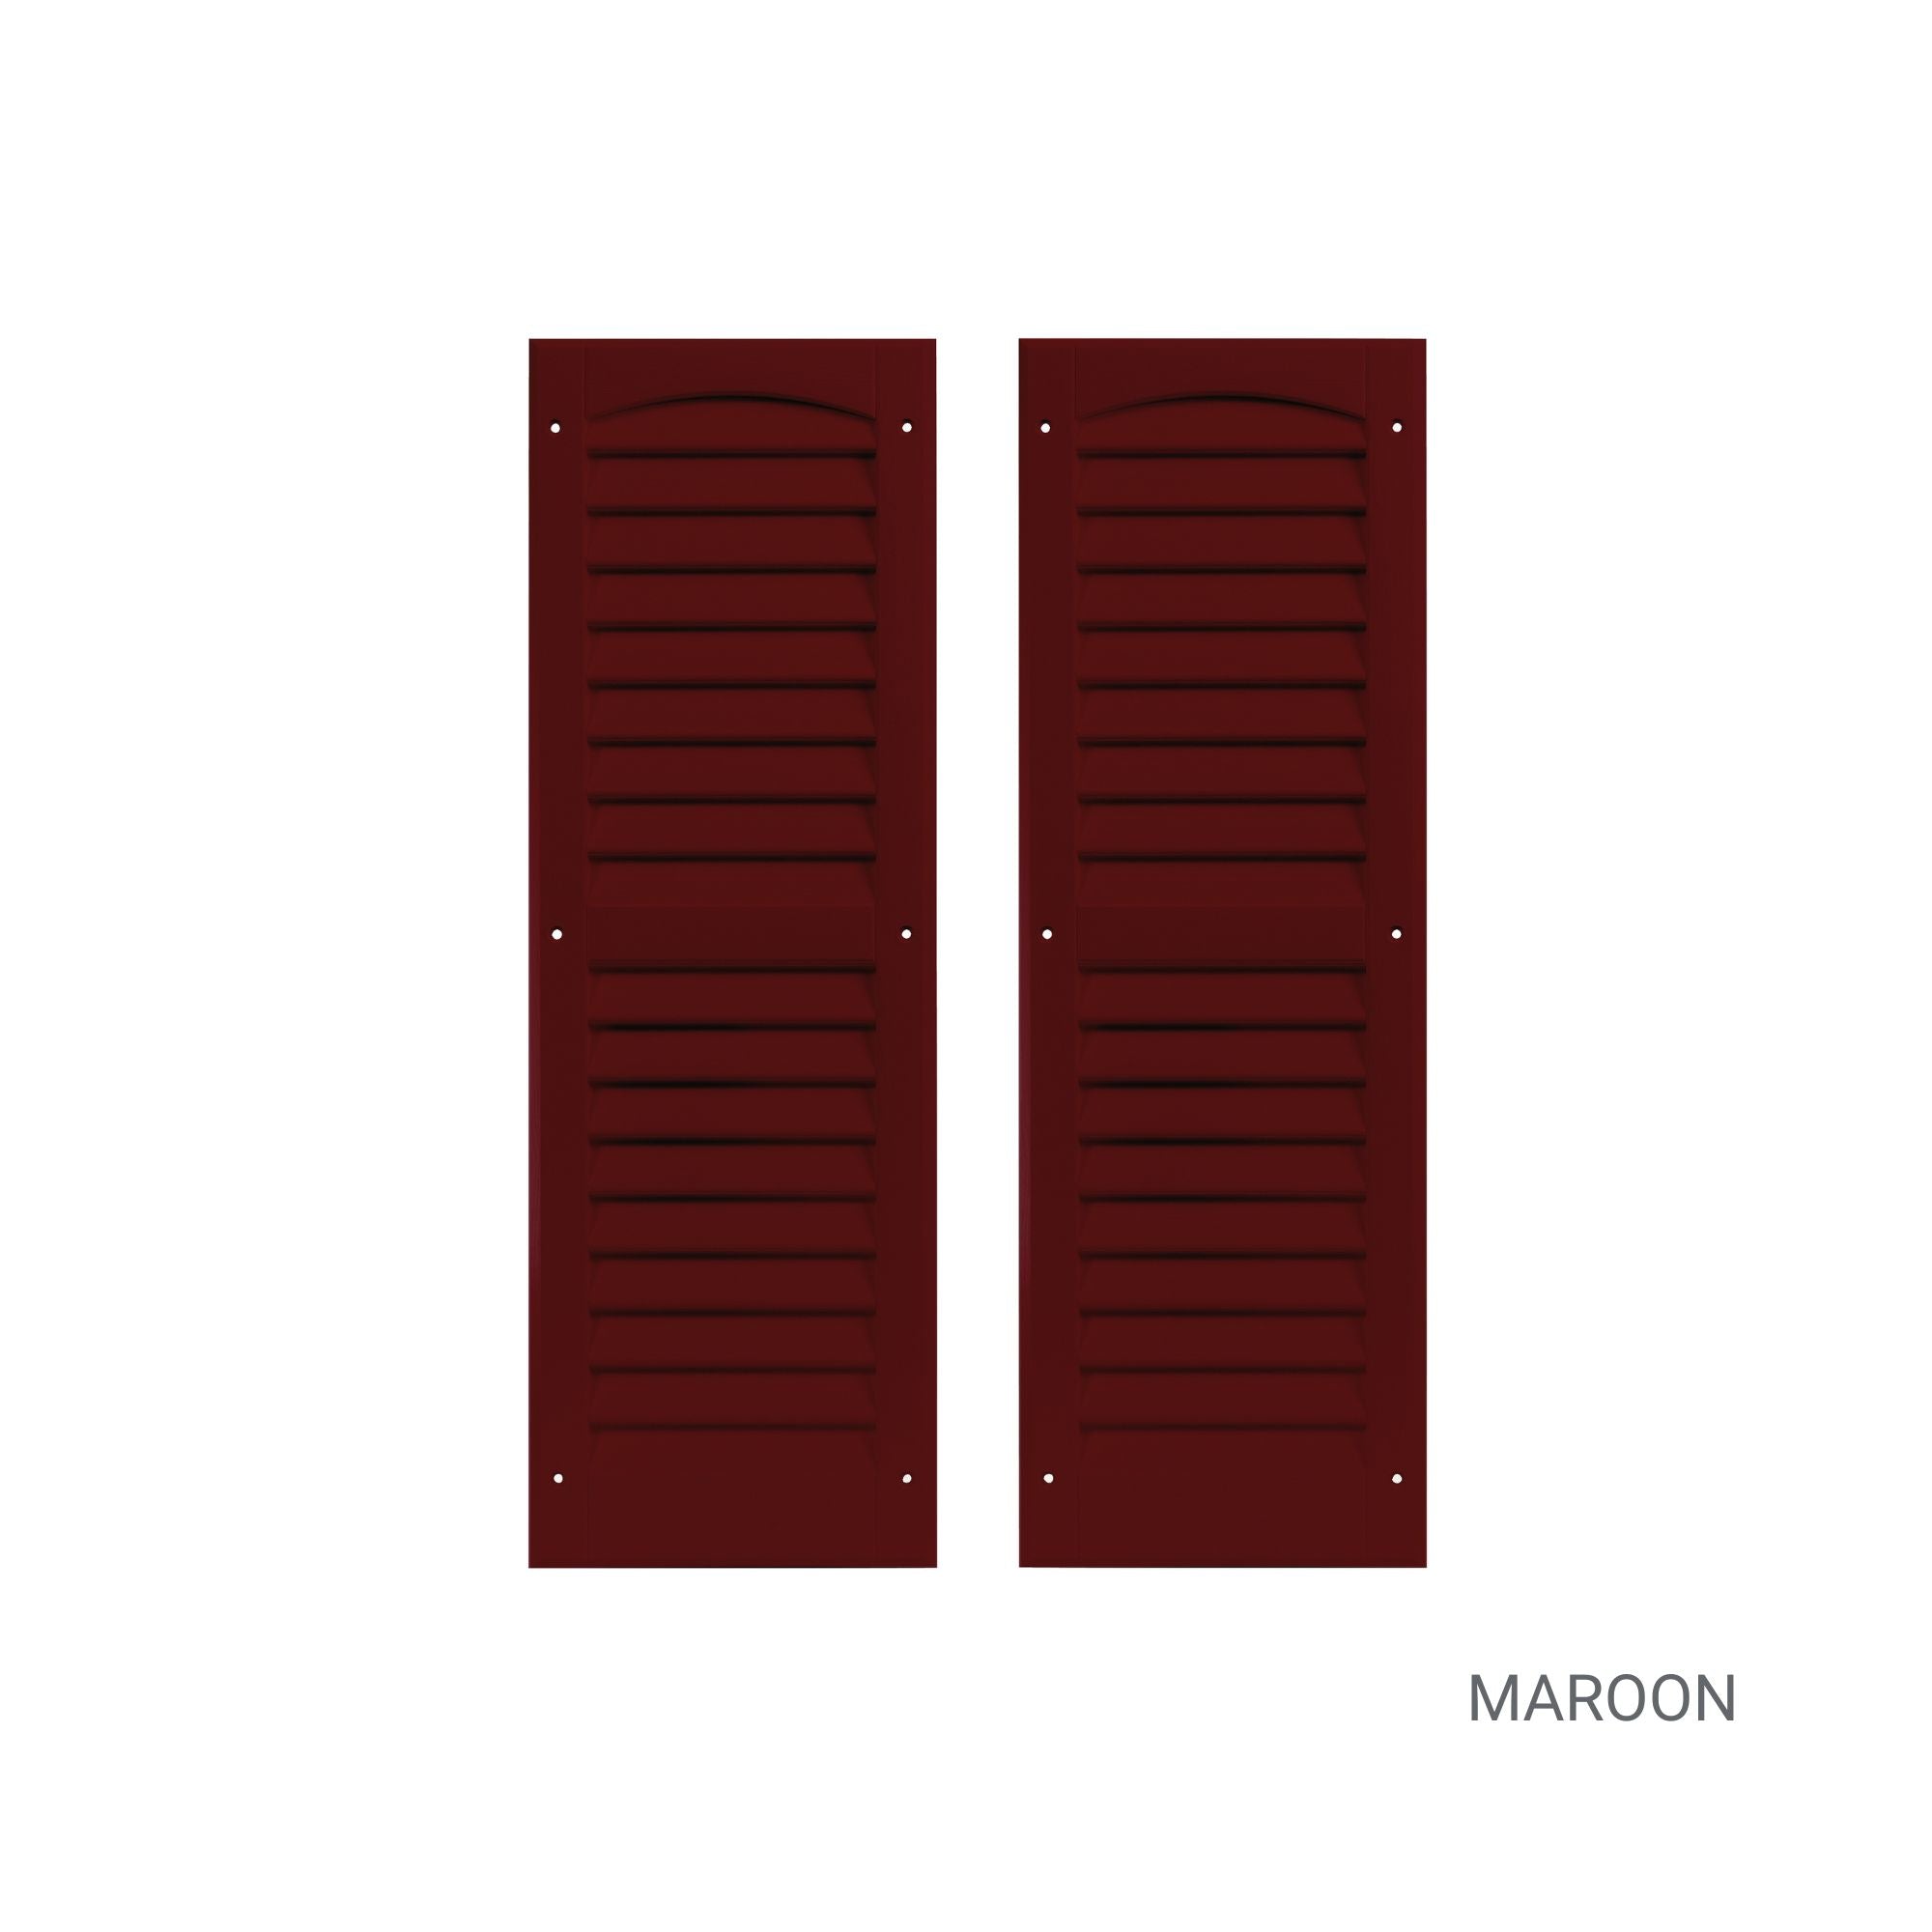 Pair of 9" W x 27" H Louvered Maroon Shutters for Sheds, Playhouses, and MORE